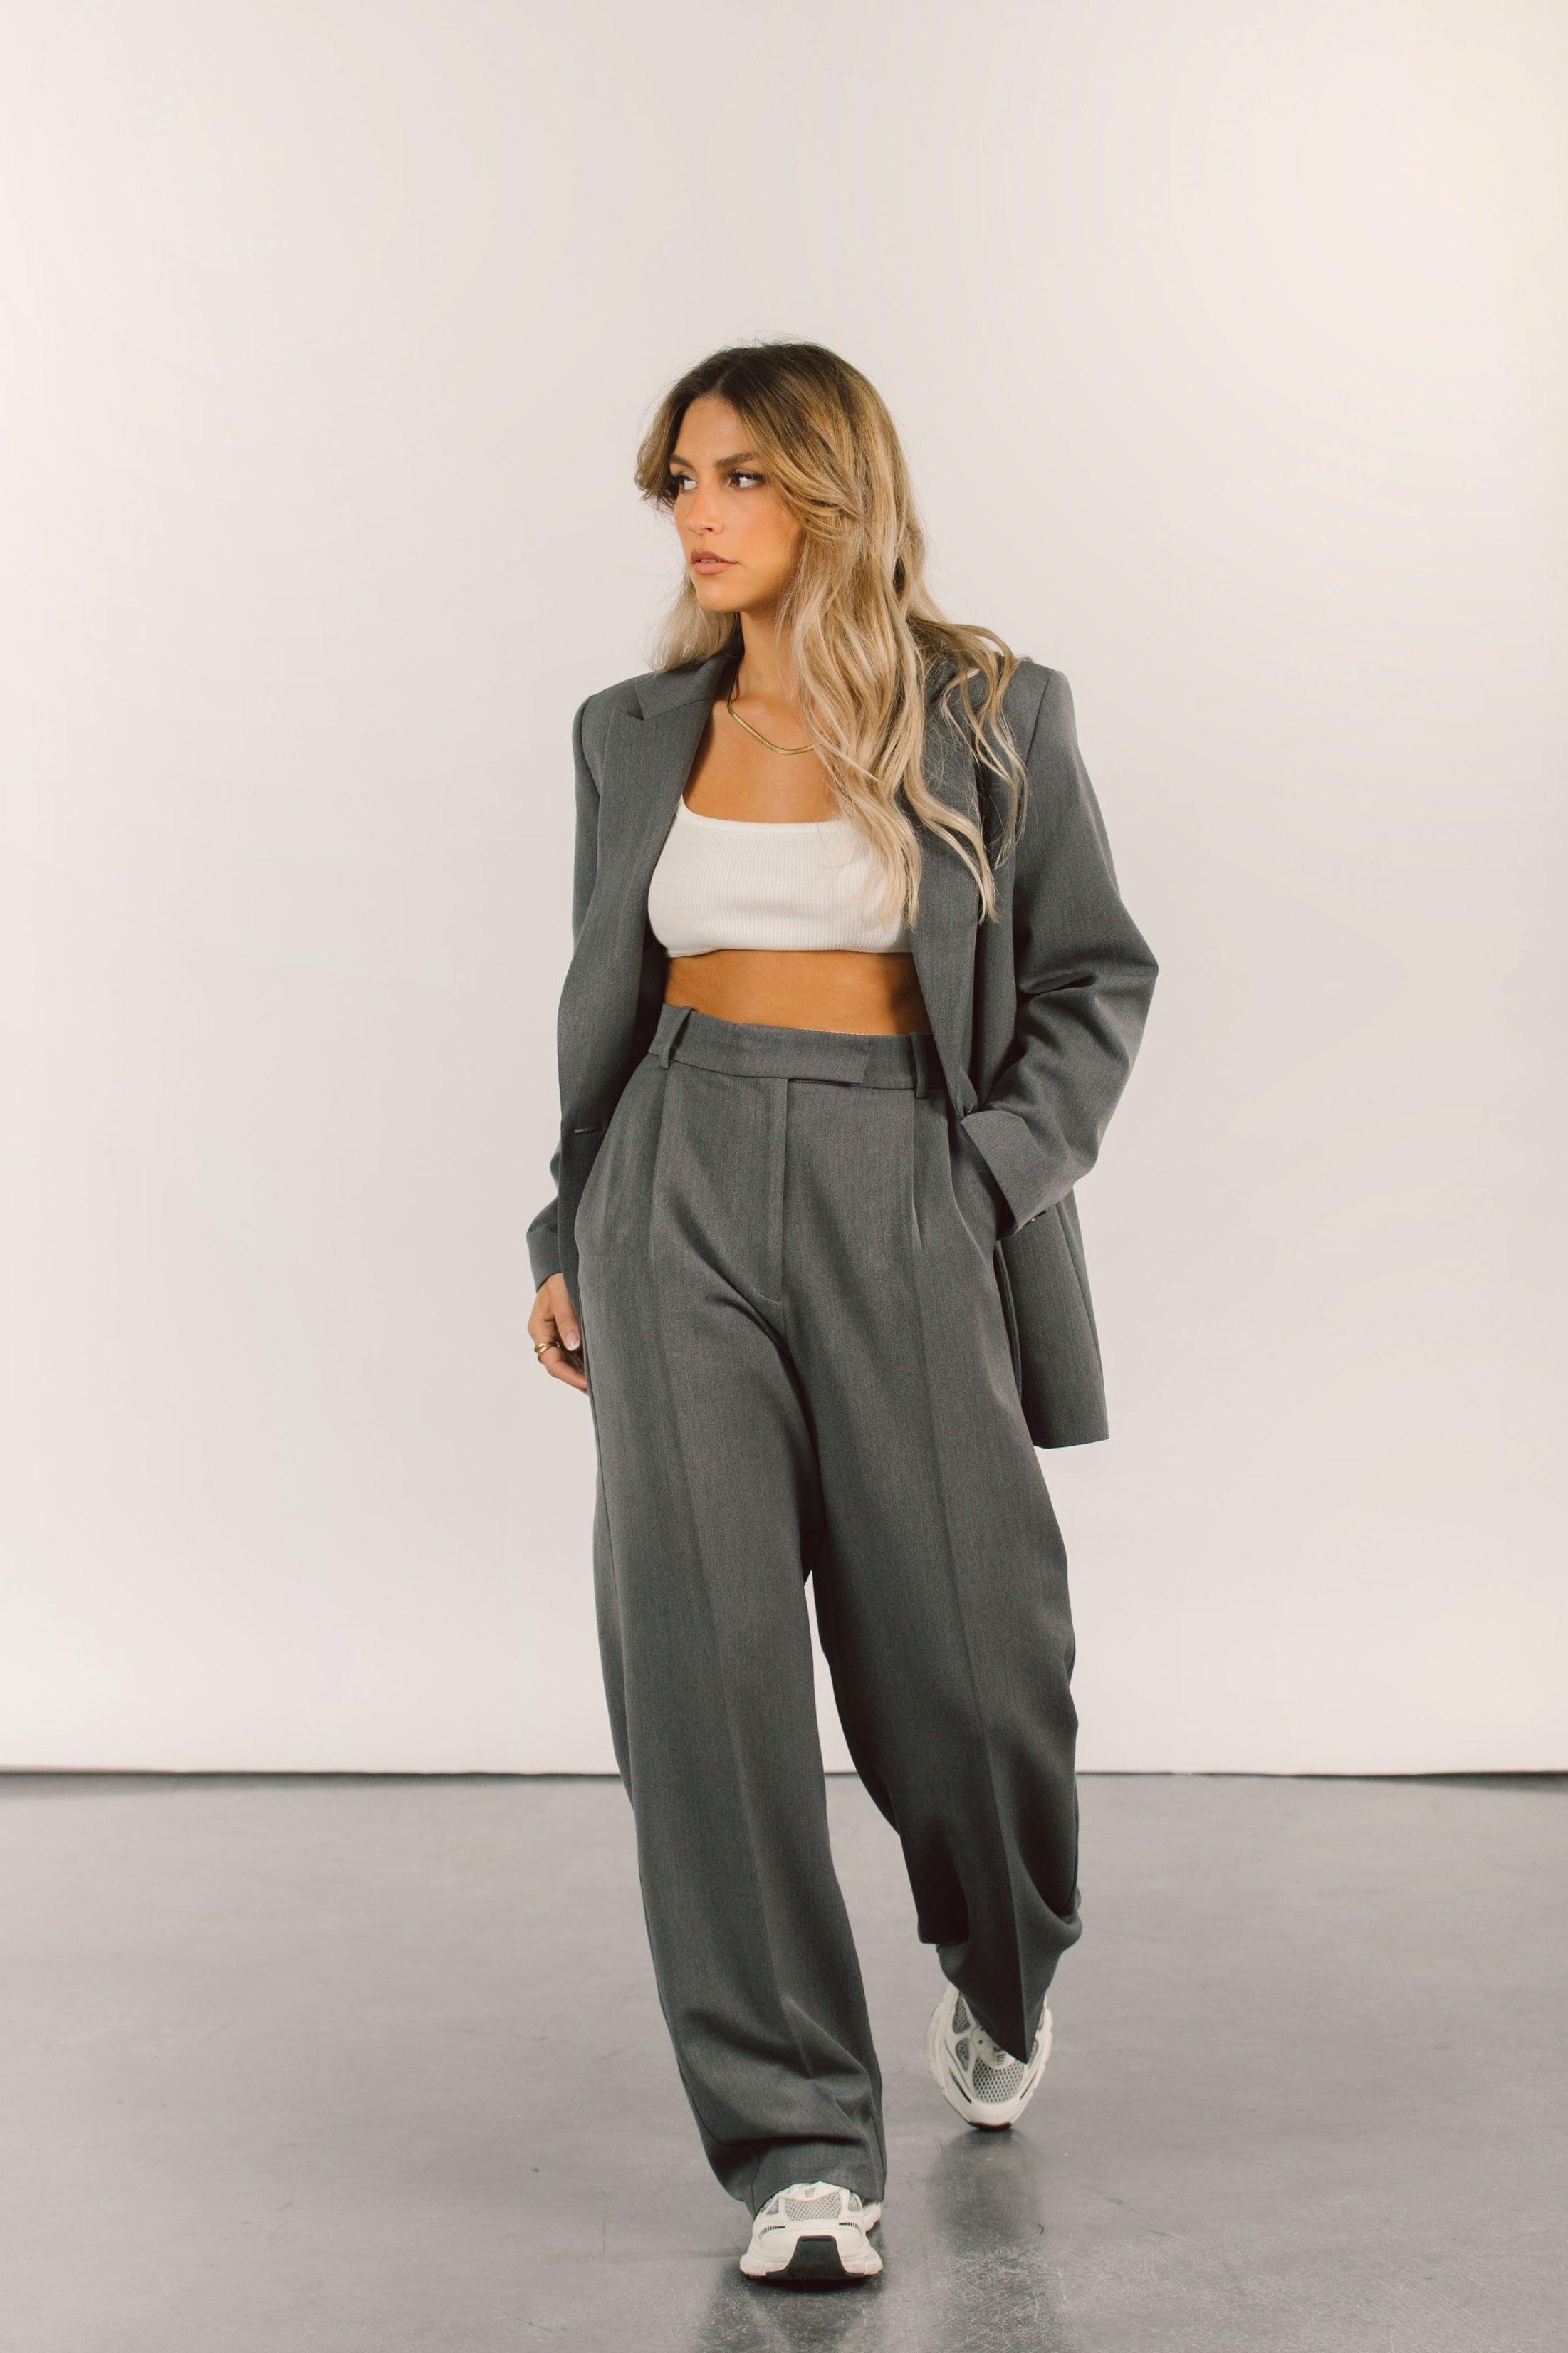 Cream Contrast Waistband Tailored Trousers | Wide leg trousers, Wide leg  pants, Clothes